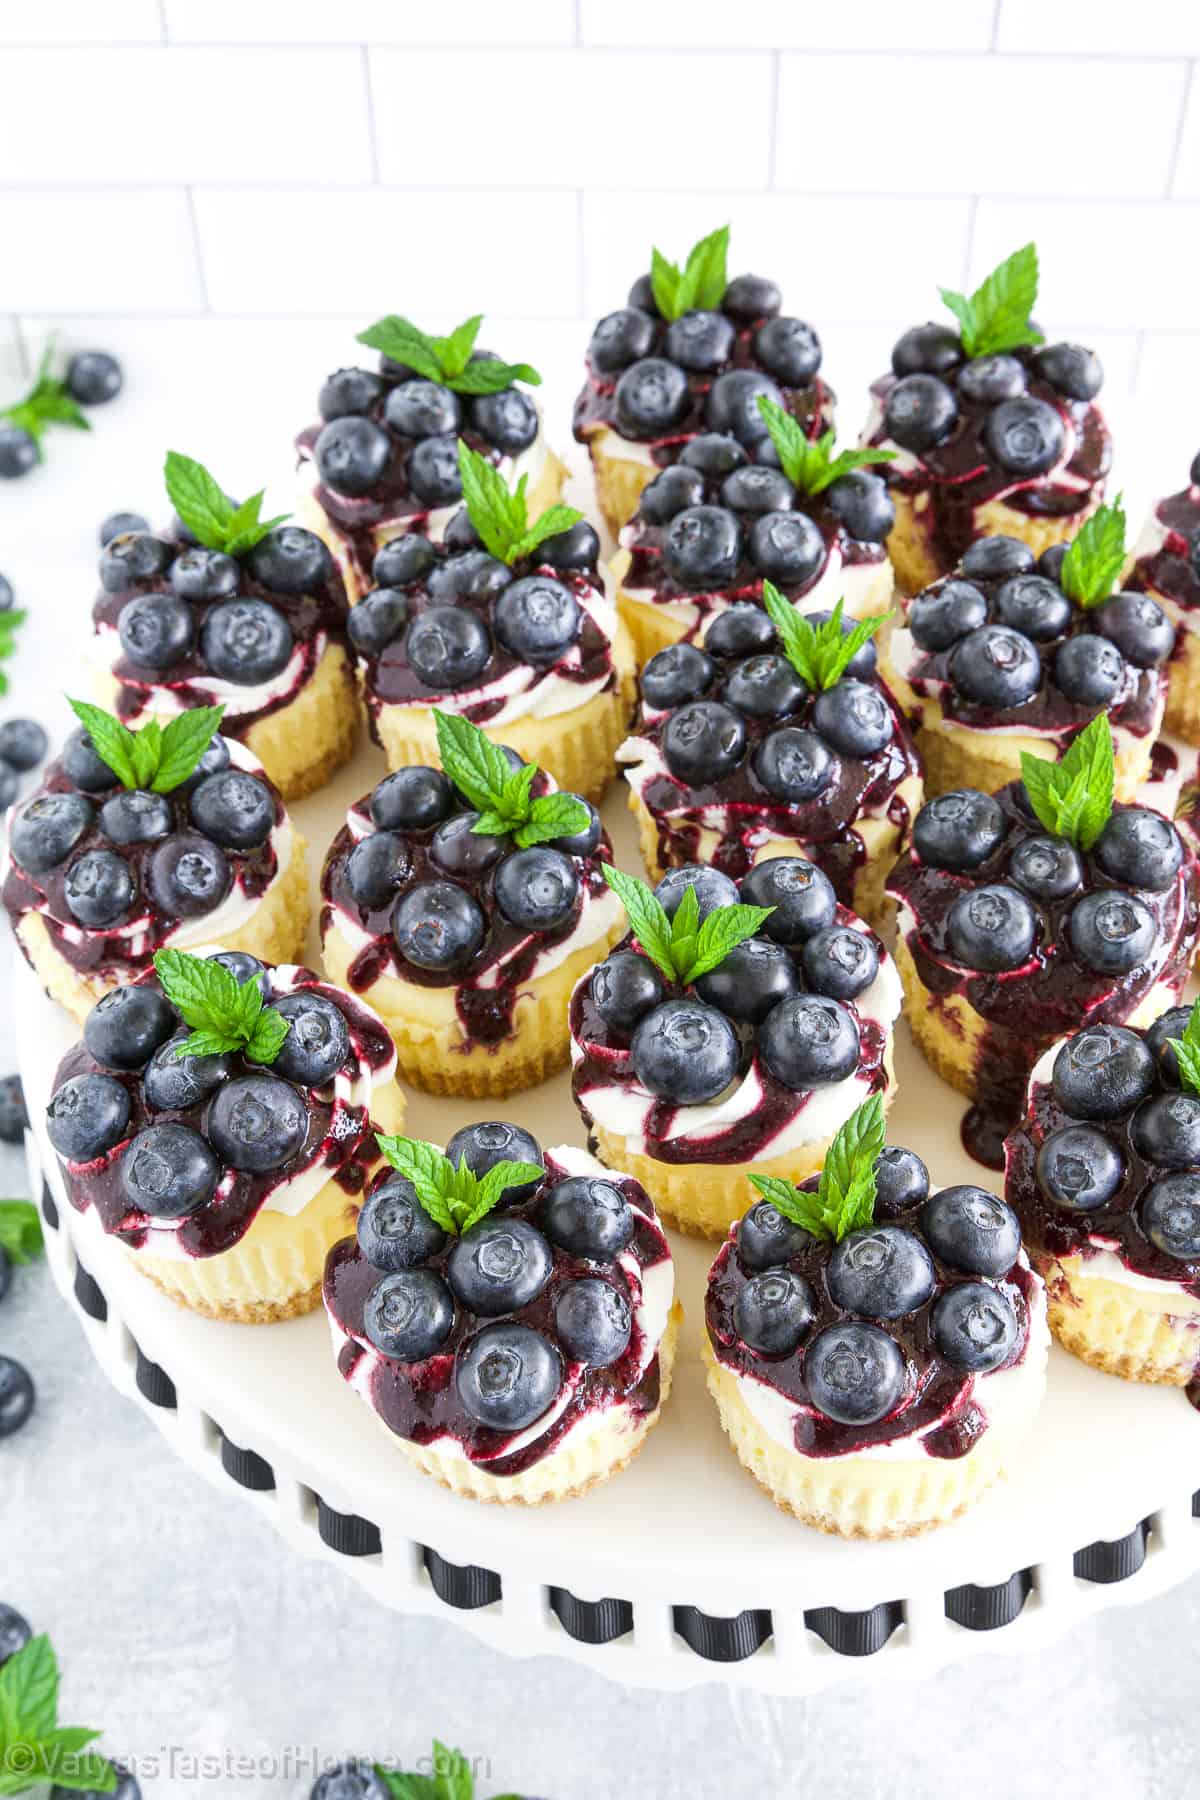 Blueberry cheesecake is a favorite treat among those who prefer the acidic creaminess of the cheesecake combined with the natural sweetness of blueberries.